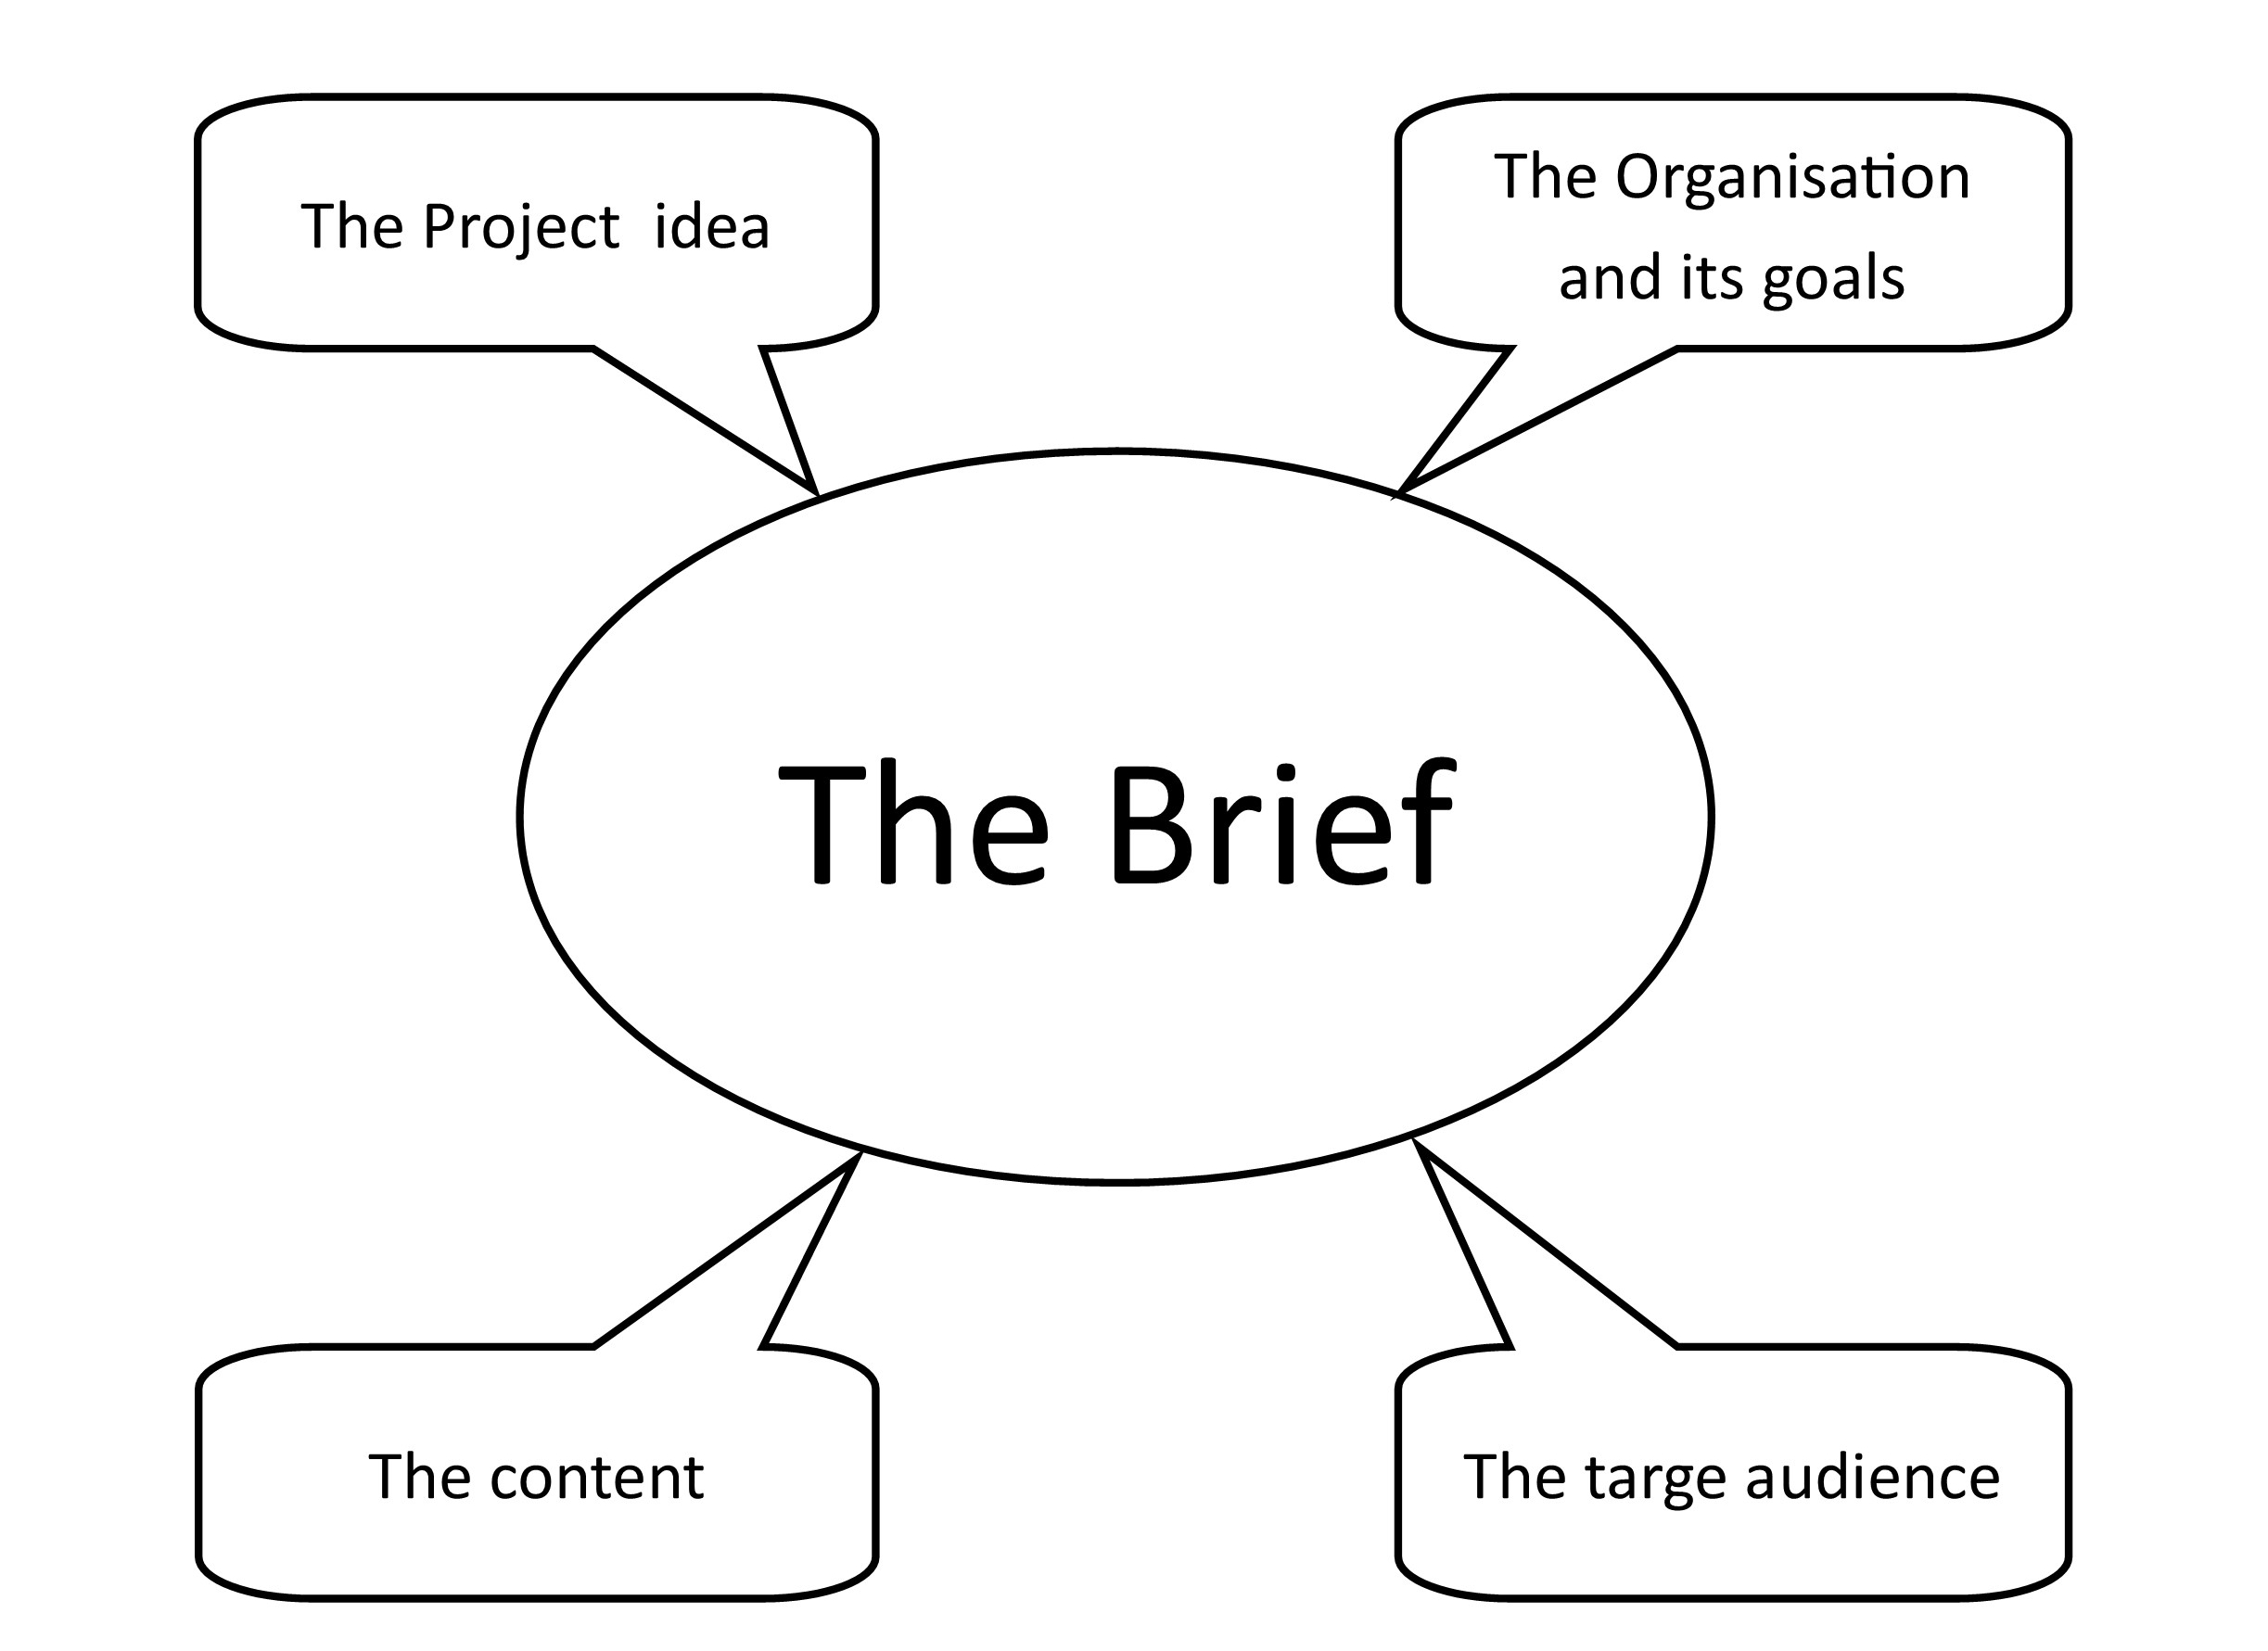 The brief lays the foundations of the project.